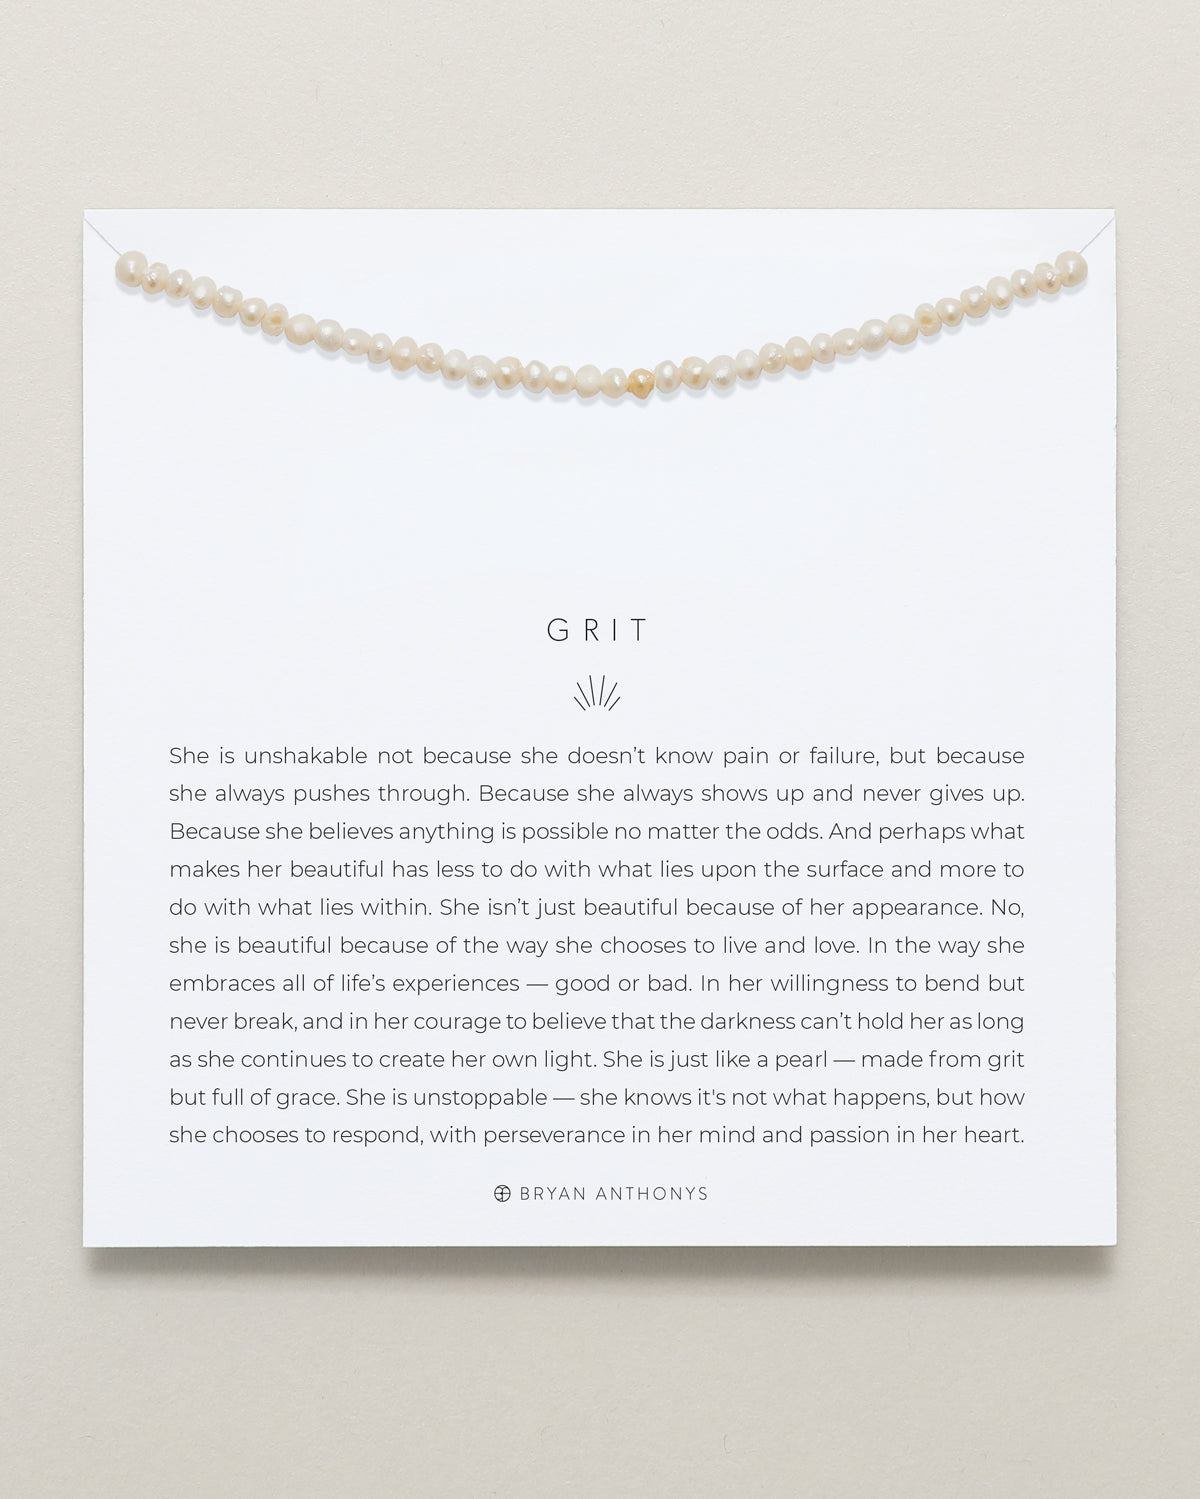 Bryan Anthonys Grit Seed Pearl Necklace On Card